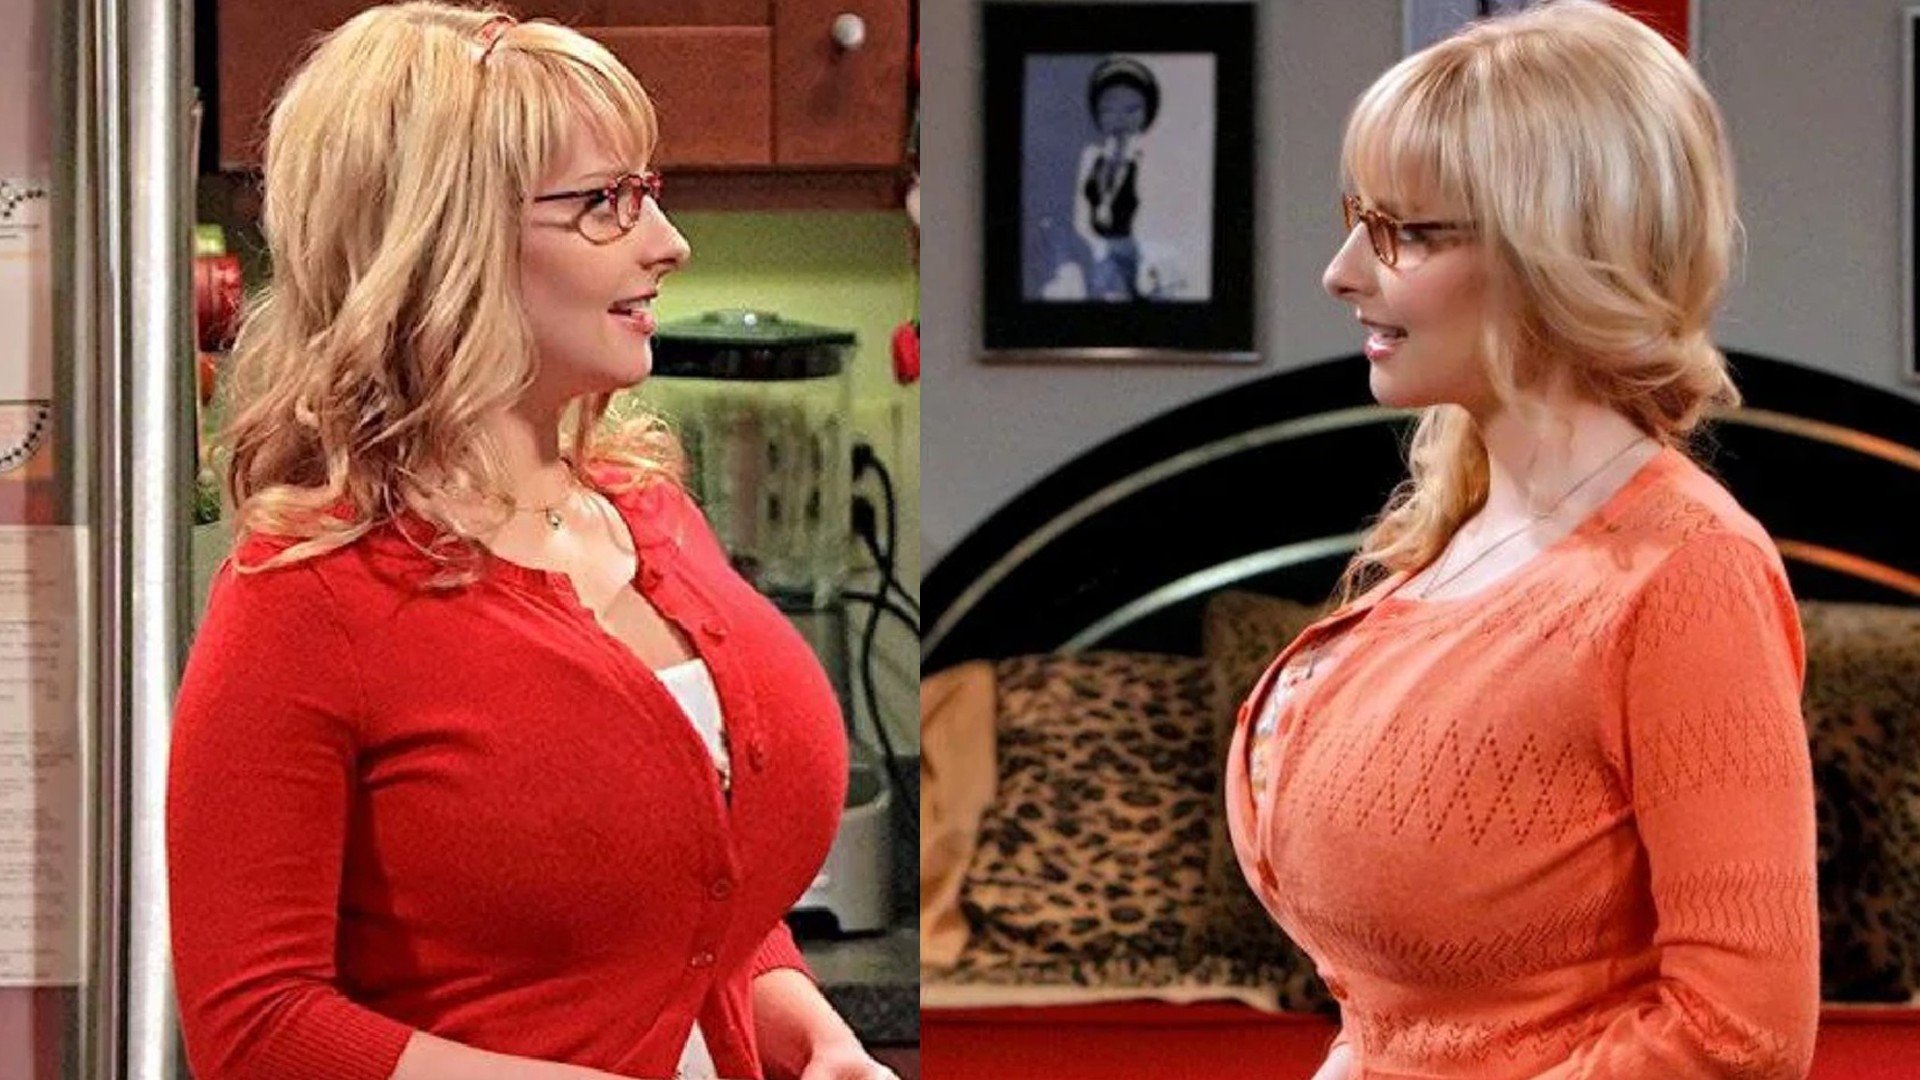 Melissa Rauch Boobs and updated collection of her boobs, ass and other hot ...